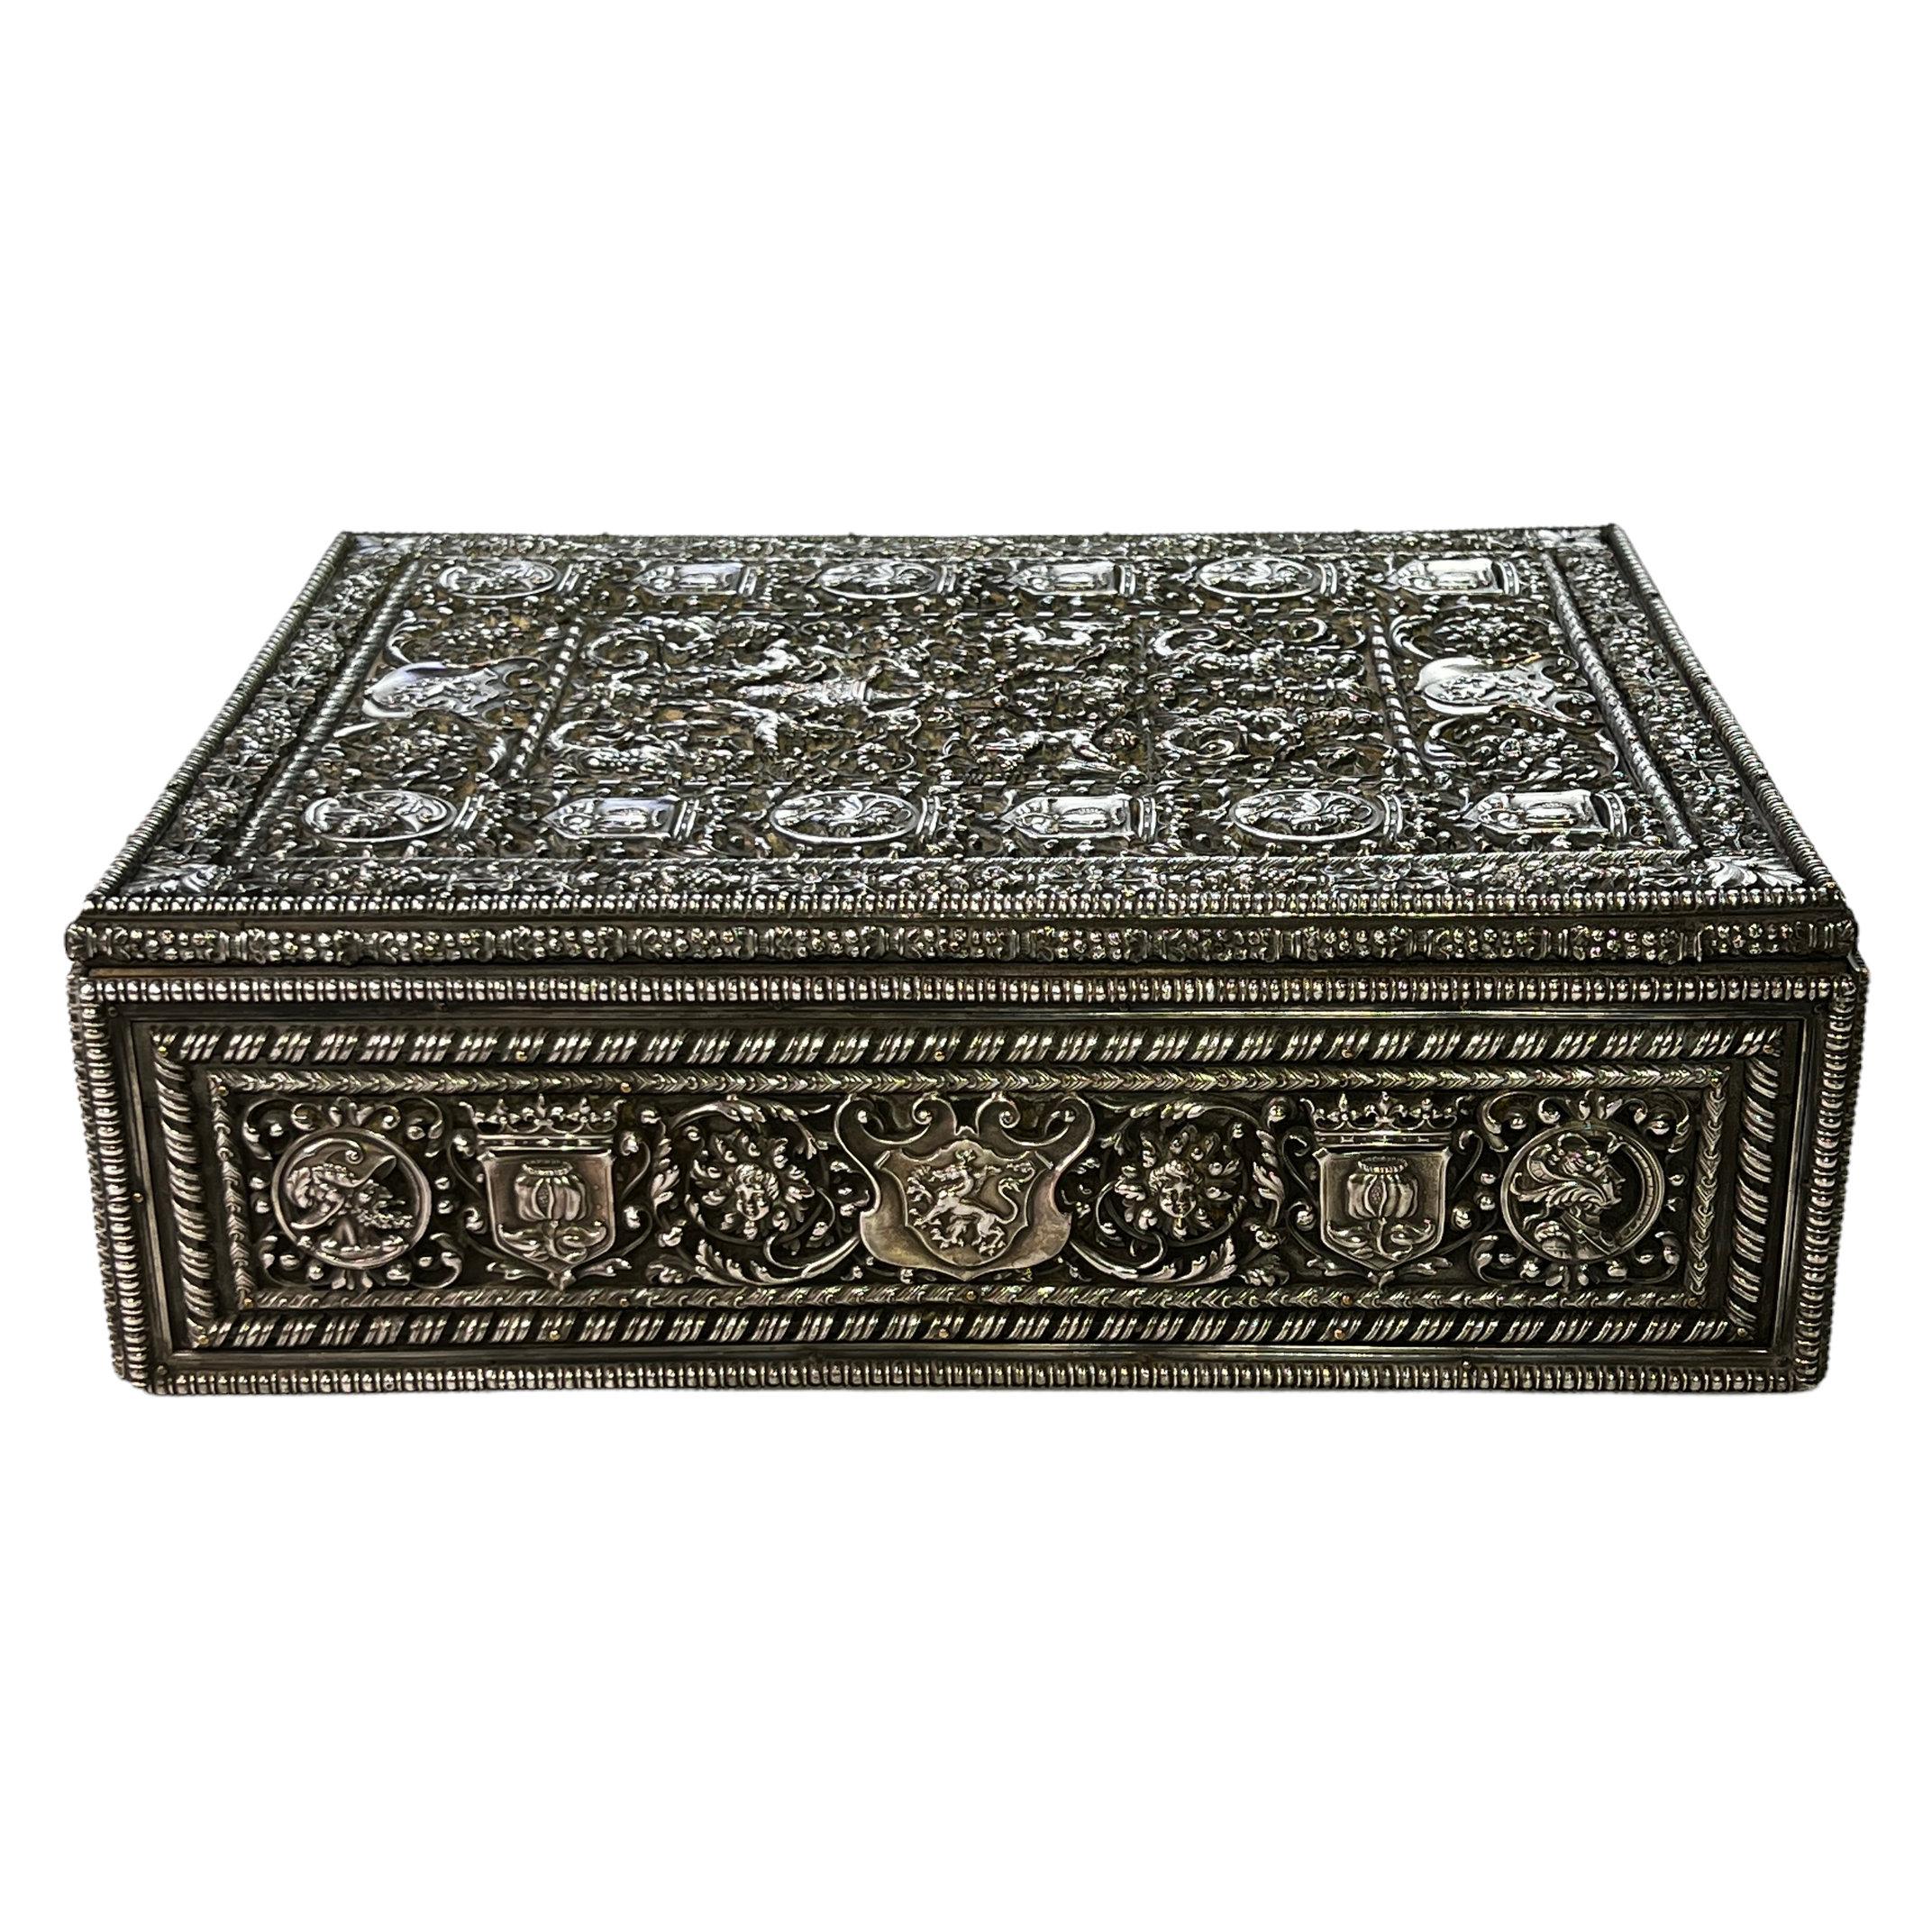 Our silvered-bronze and velvet humidor in the Renaissance fashion was produced by Edward F. Caldwell and Co., circa 1910. Its lid and sides feature elaborate pierced repossé decorations including scrolling foliage, armorials, masks and musician